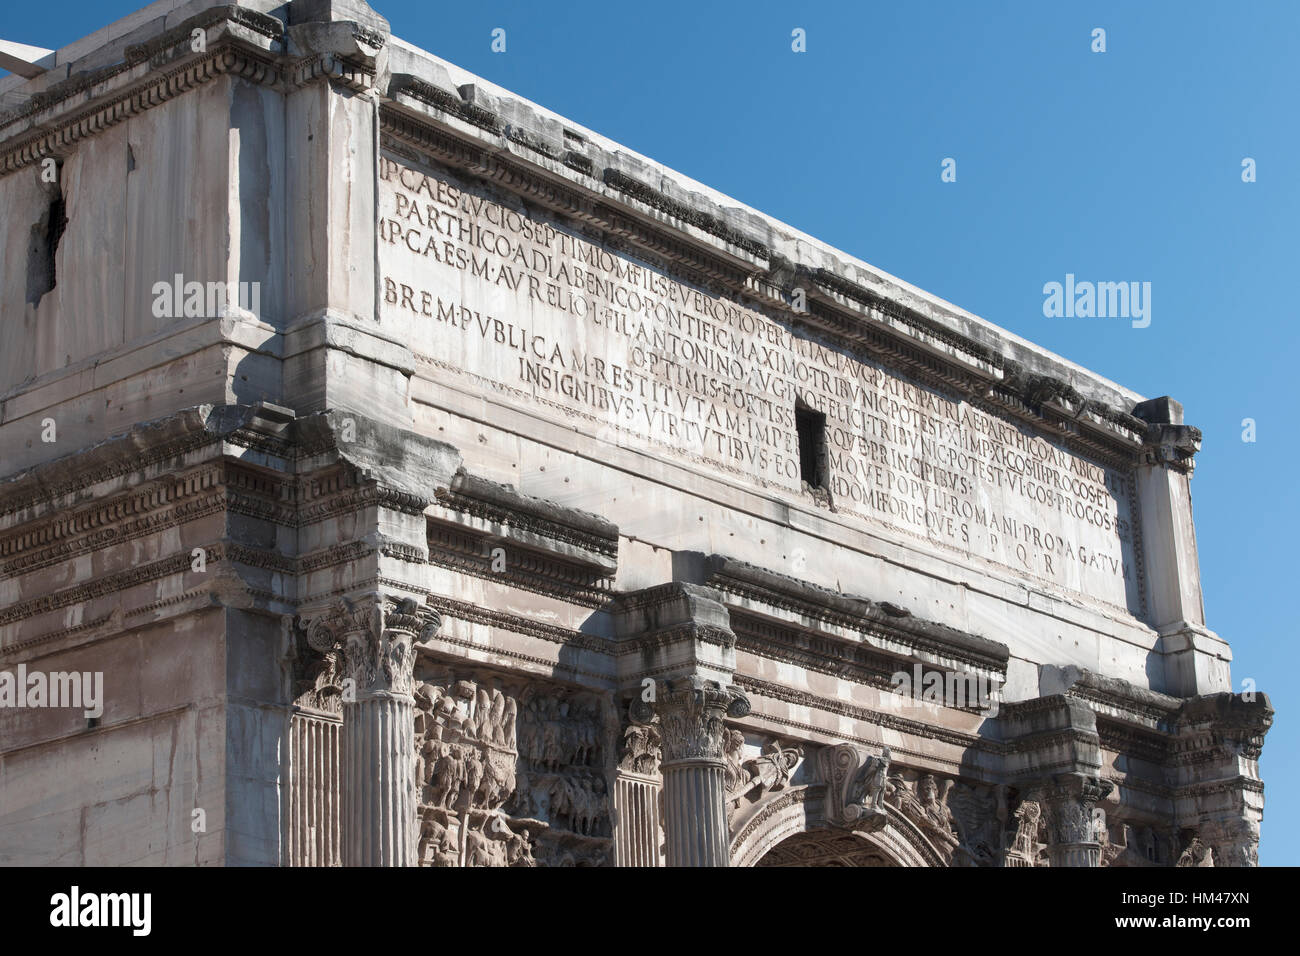 Carvings on the Arch of Septimius Severus, Roman Forum, Rome, Italy. Stock Photo